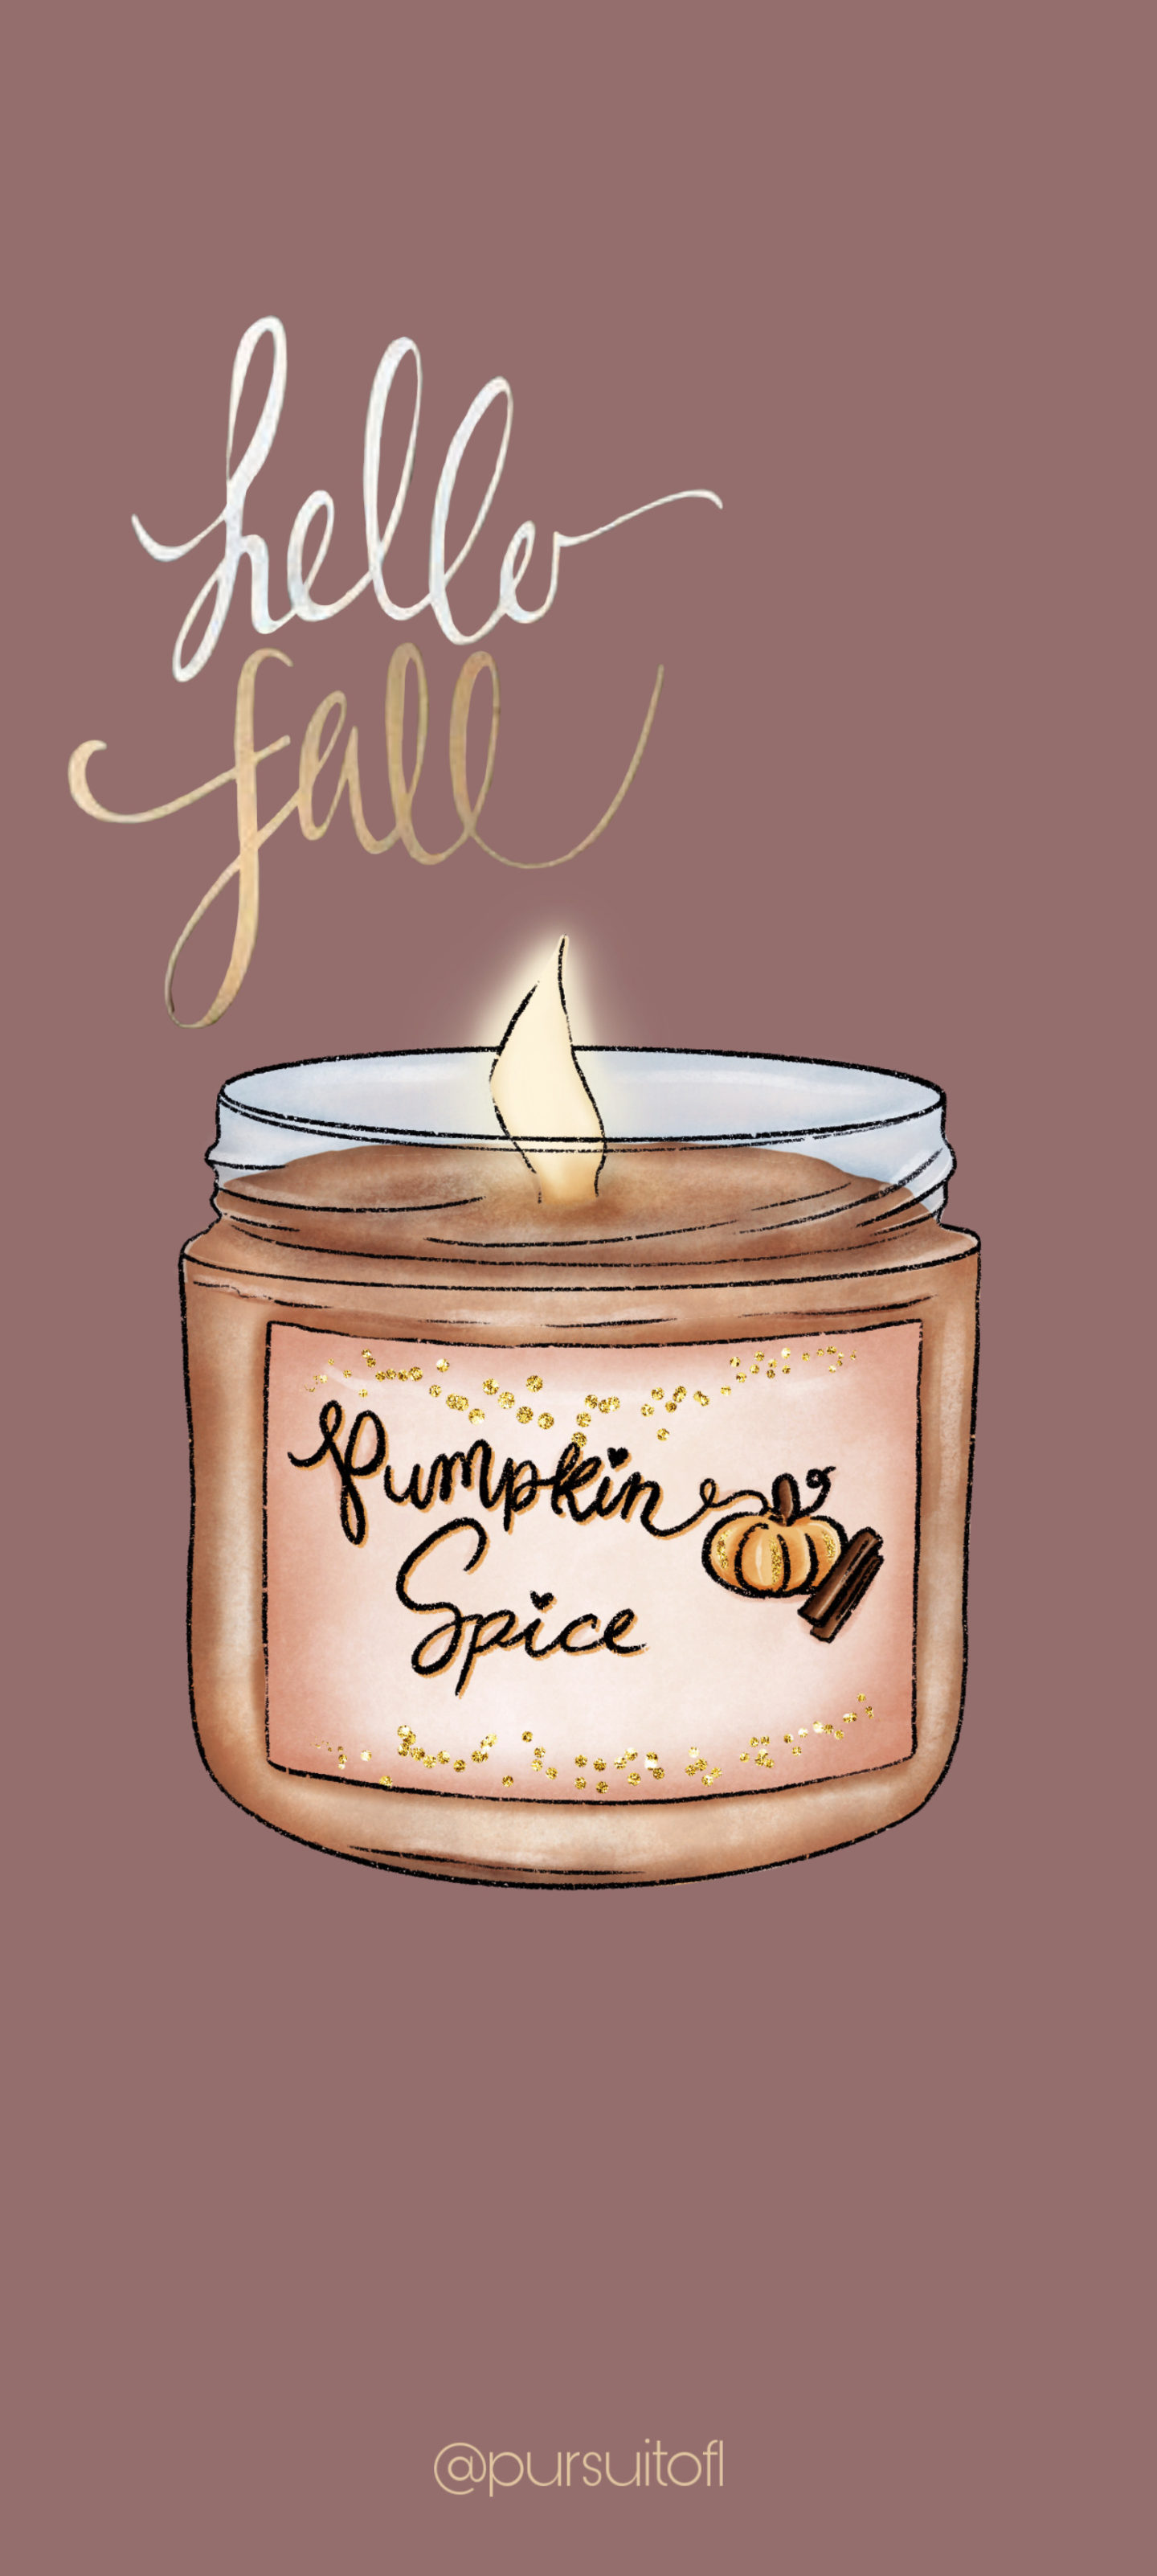 Hello Fall Phone Wallpaper with Pumpkin Spice Candle Illustration